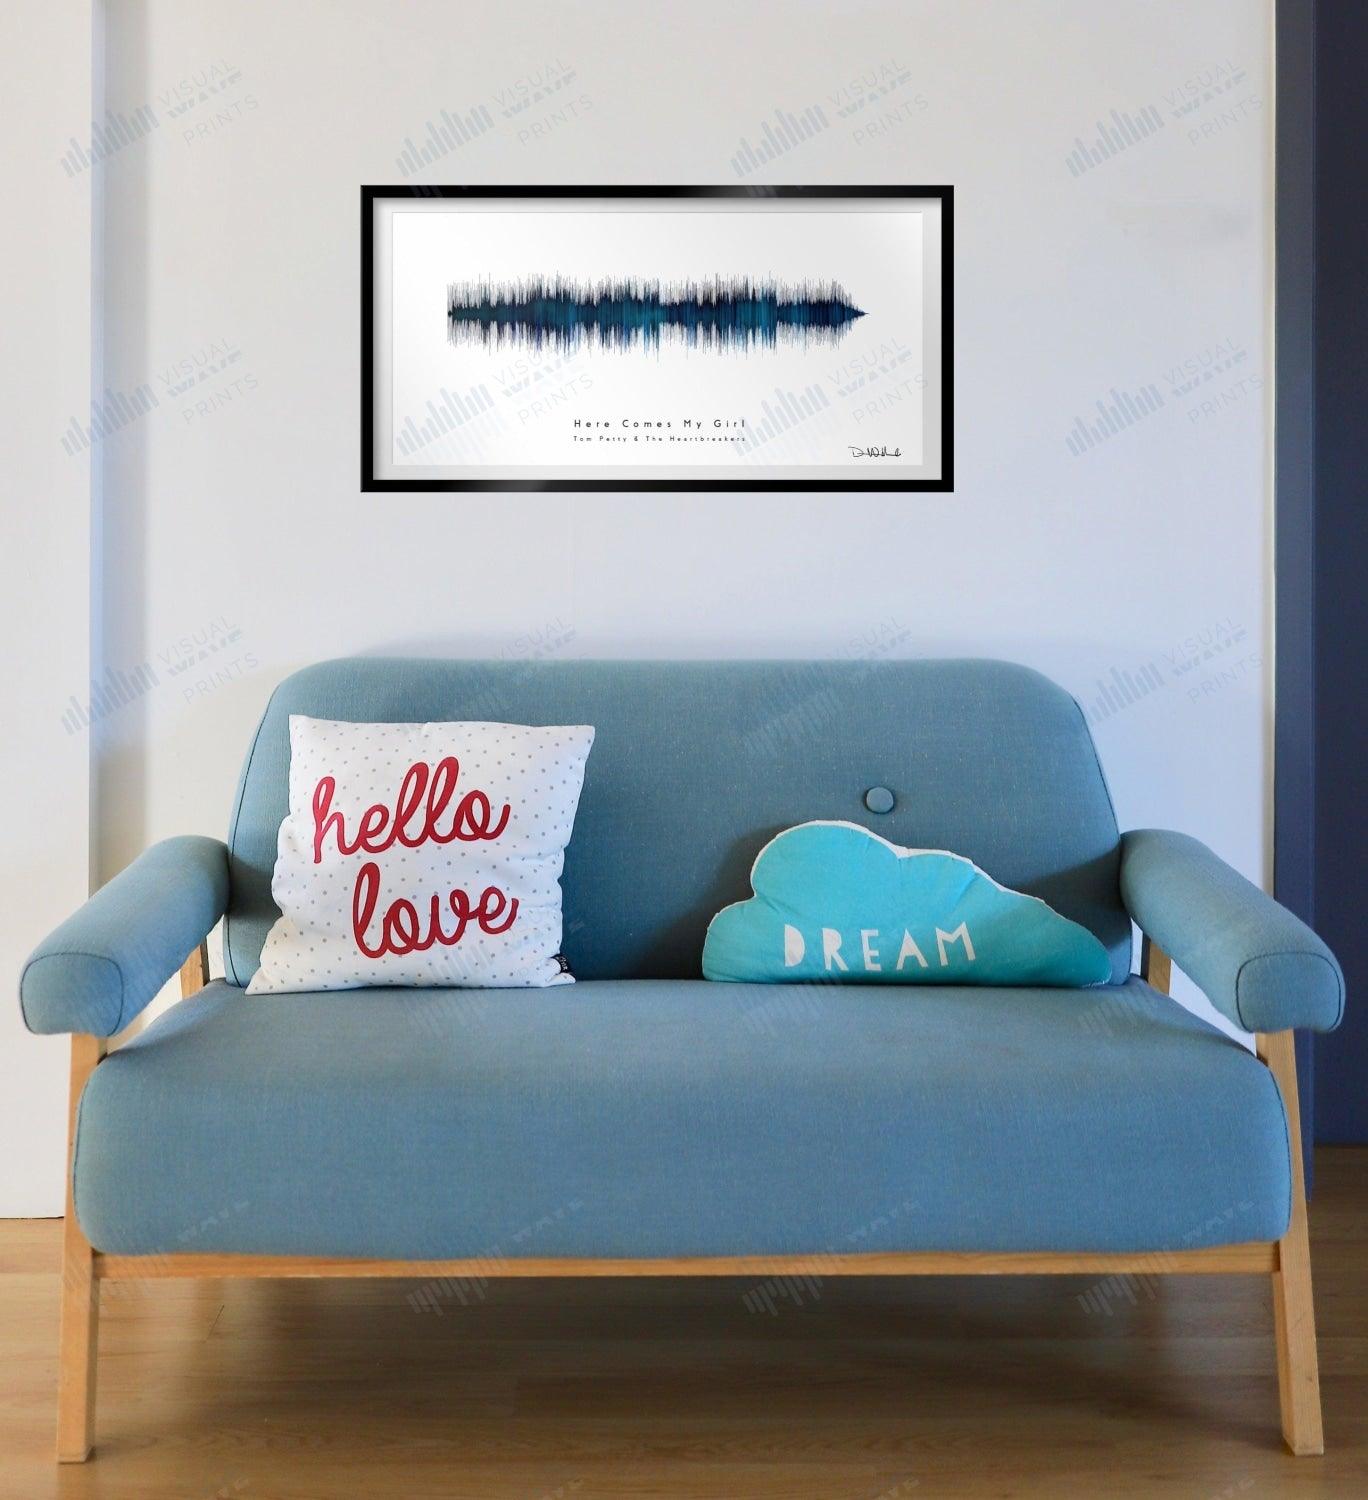 Here Comes My Girl by Tom Petty and the Heartbreakers - Visual Wave Prints